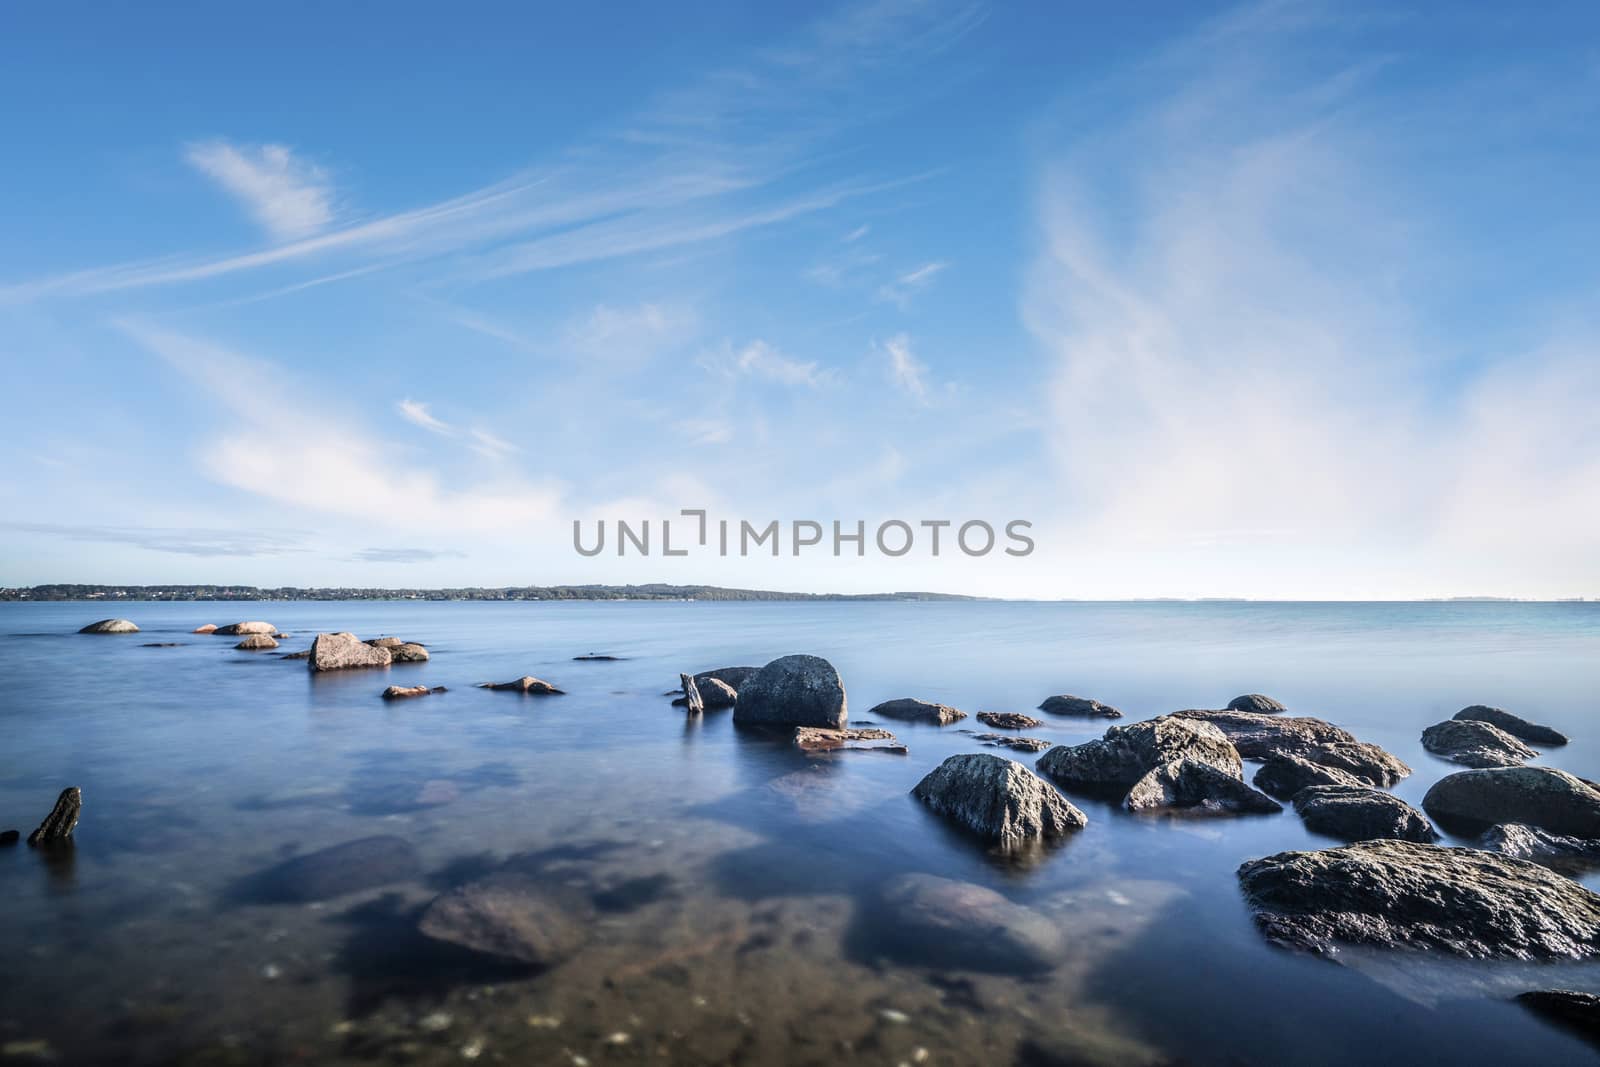 Rocks by the ocean in the calm water under a beautiful blue sky